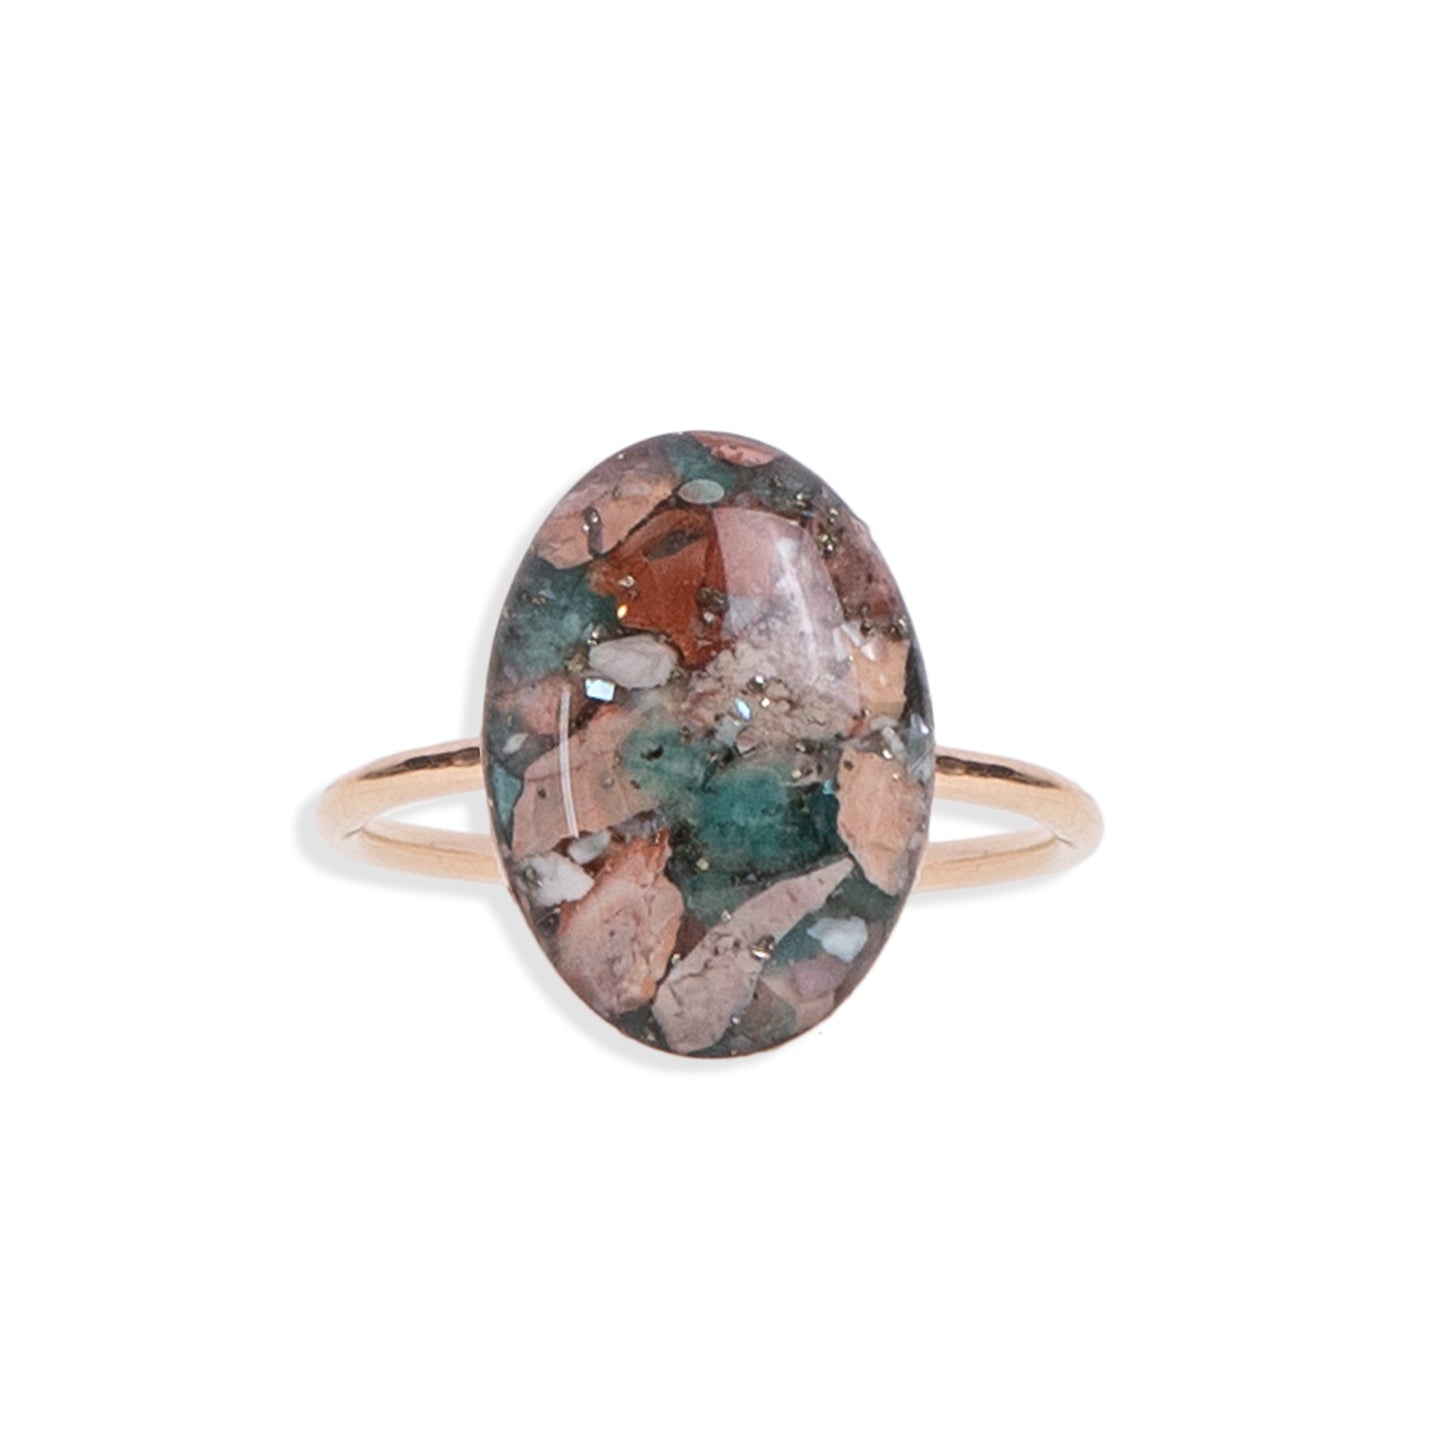 Statement Oval ring with mixed crushed stones set in 14k gold filled